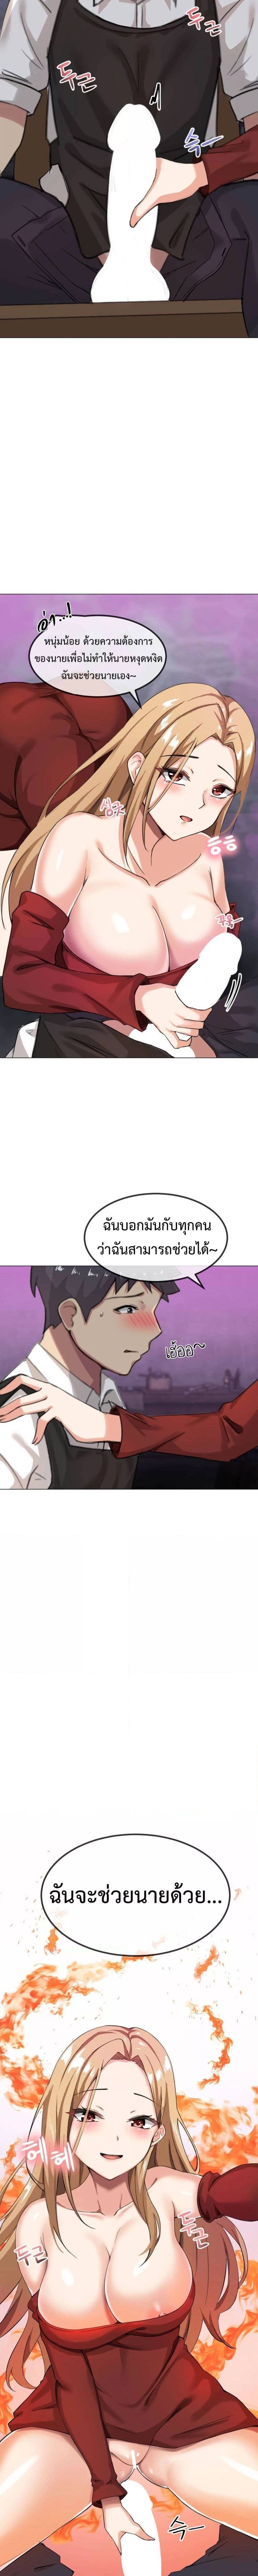 Meat Doll Workshop in Another World ตอนที่ 1 ภาพ 15